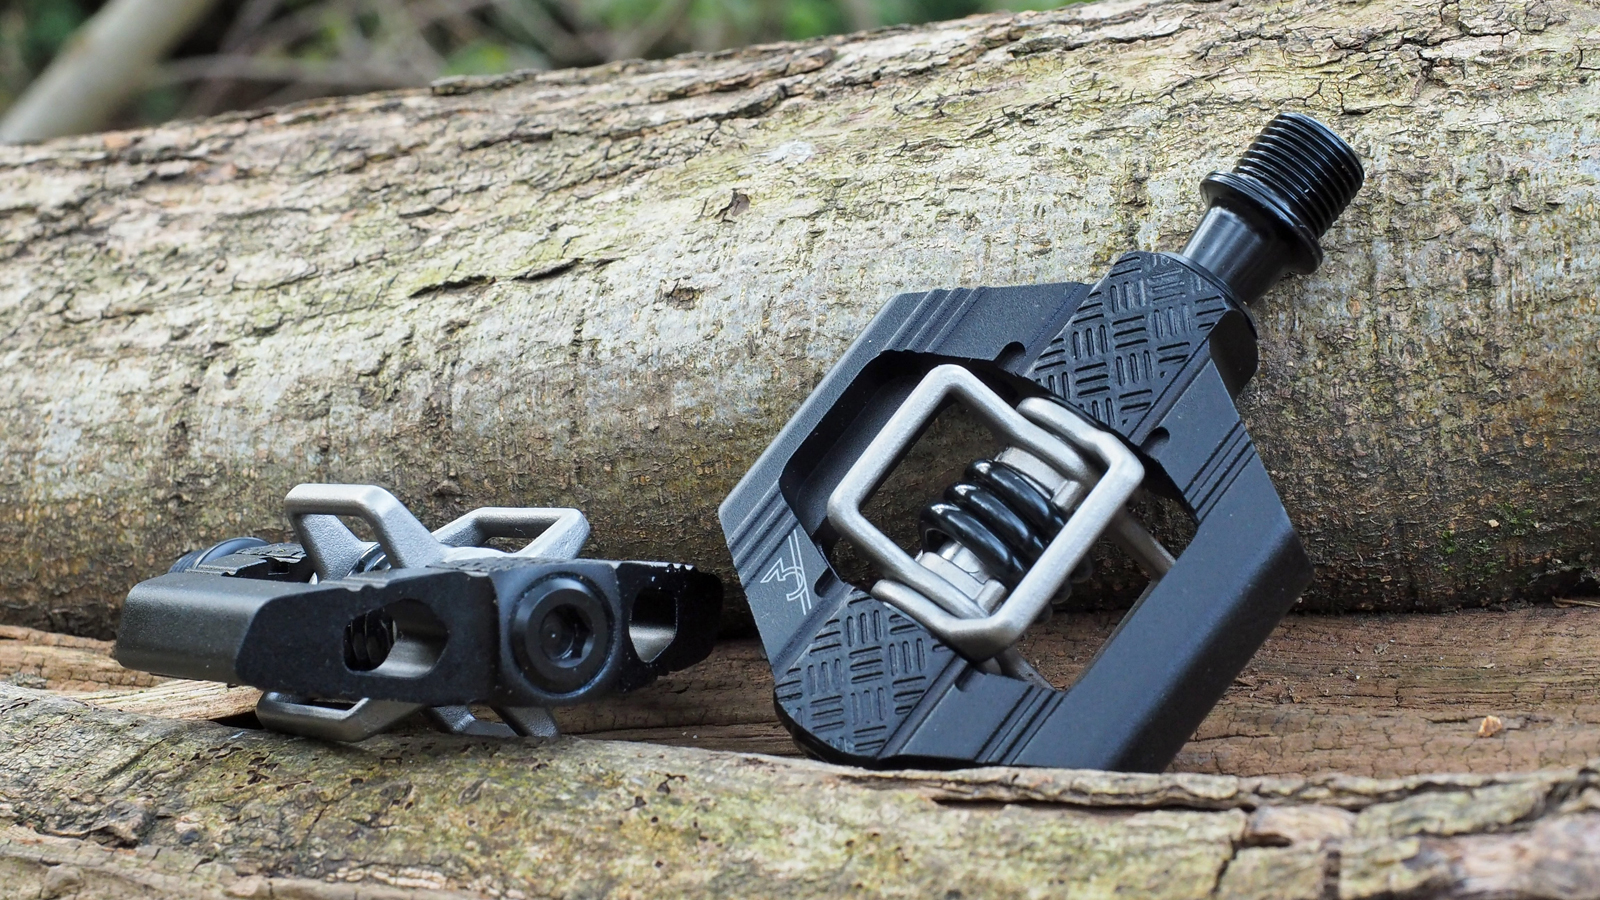 Crankbrothers Candy 3 pedal review – XC clipless meets platform support